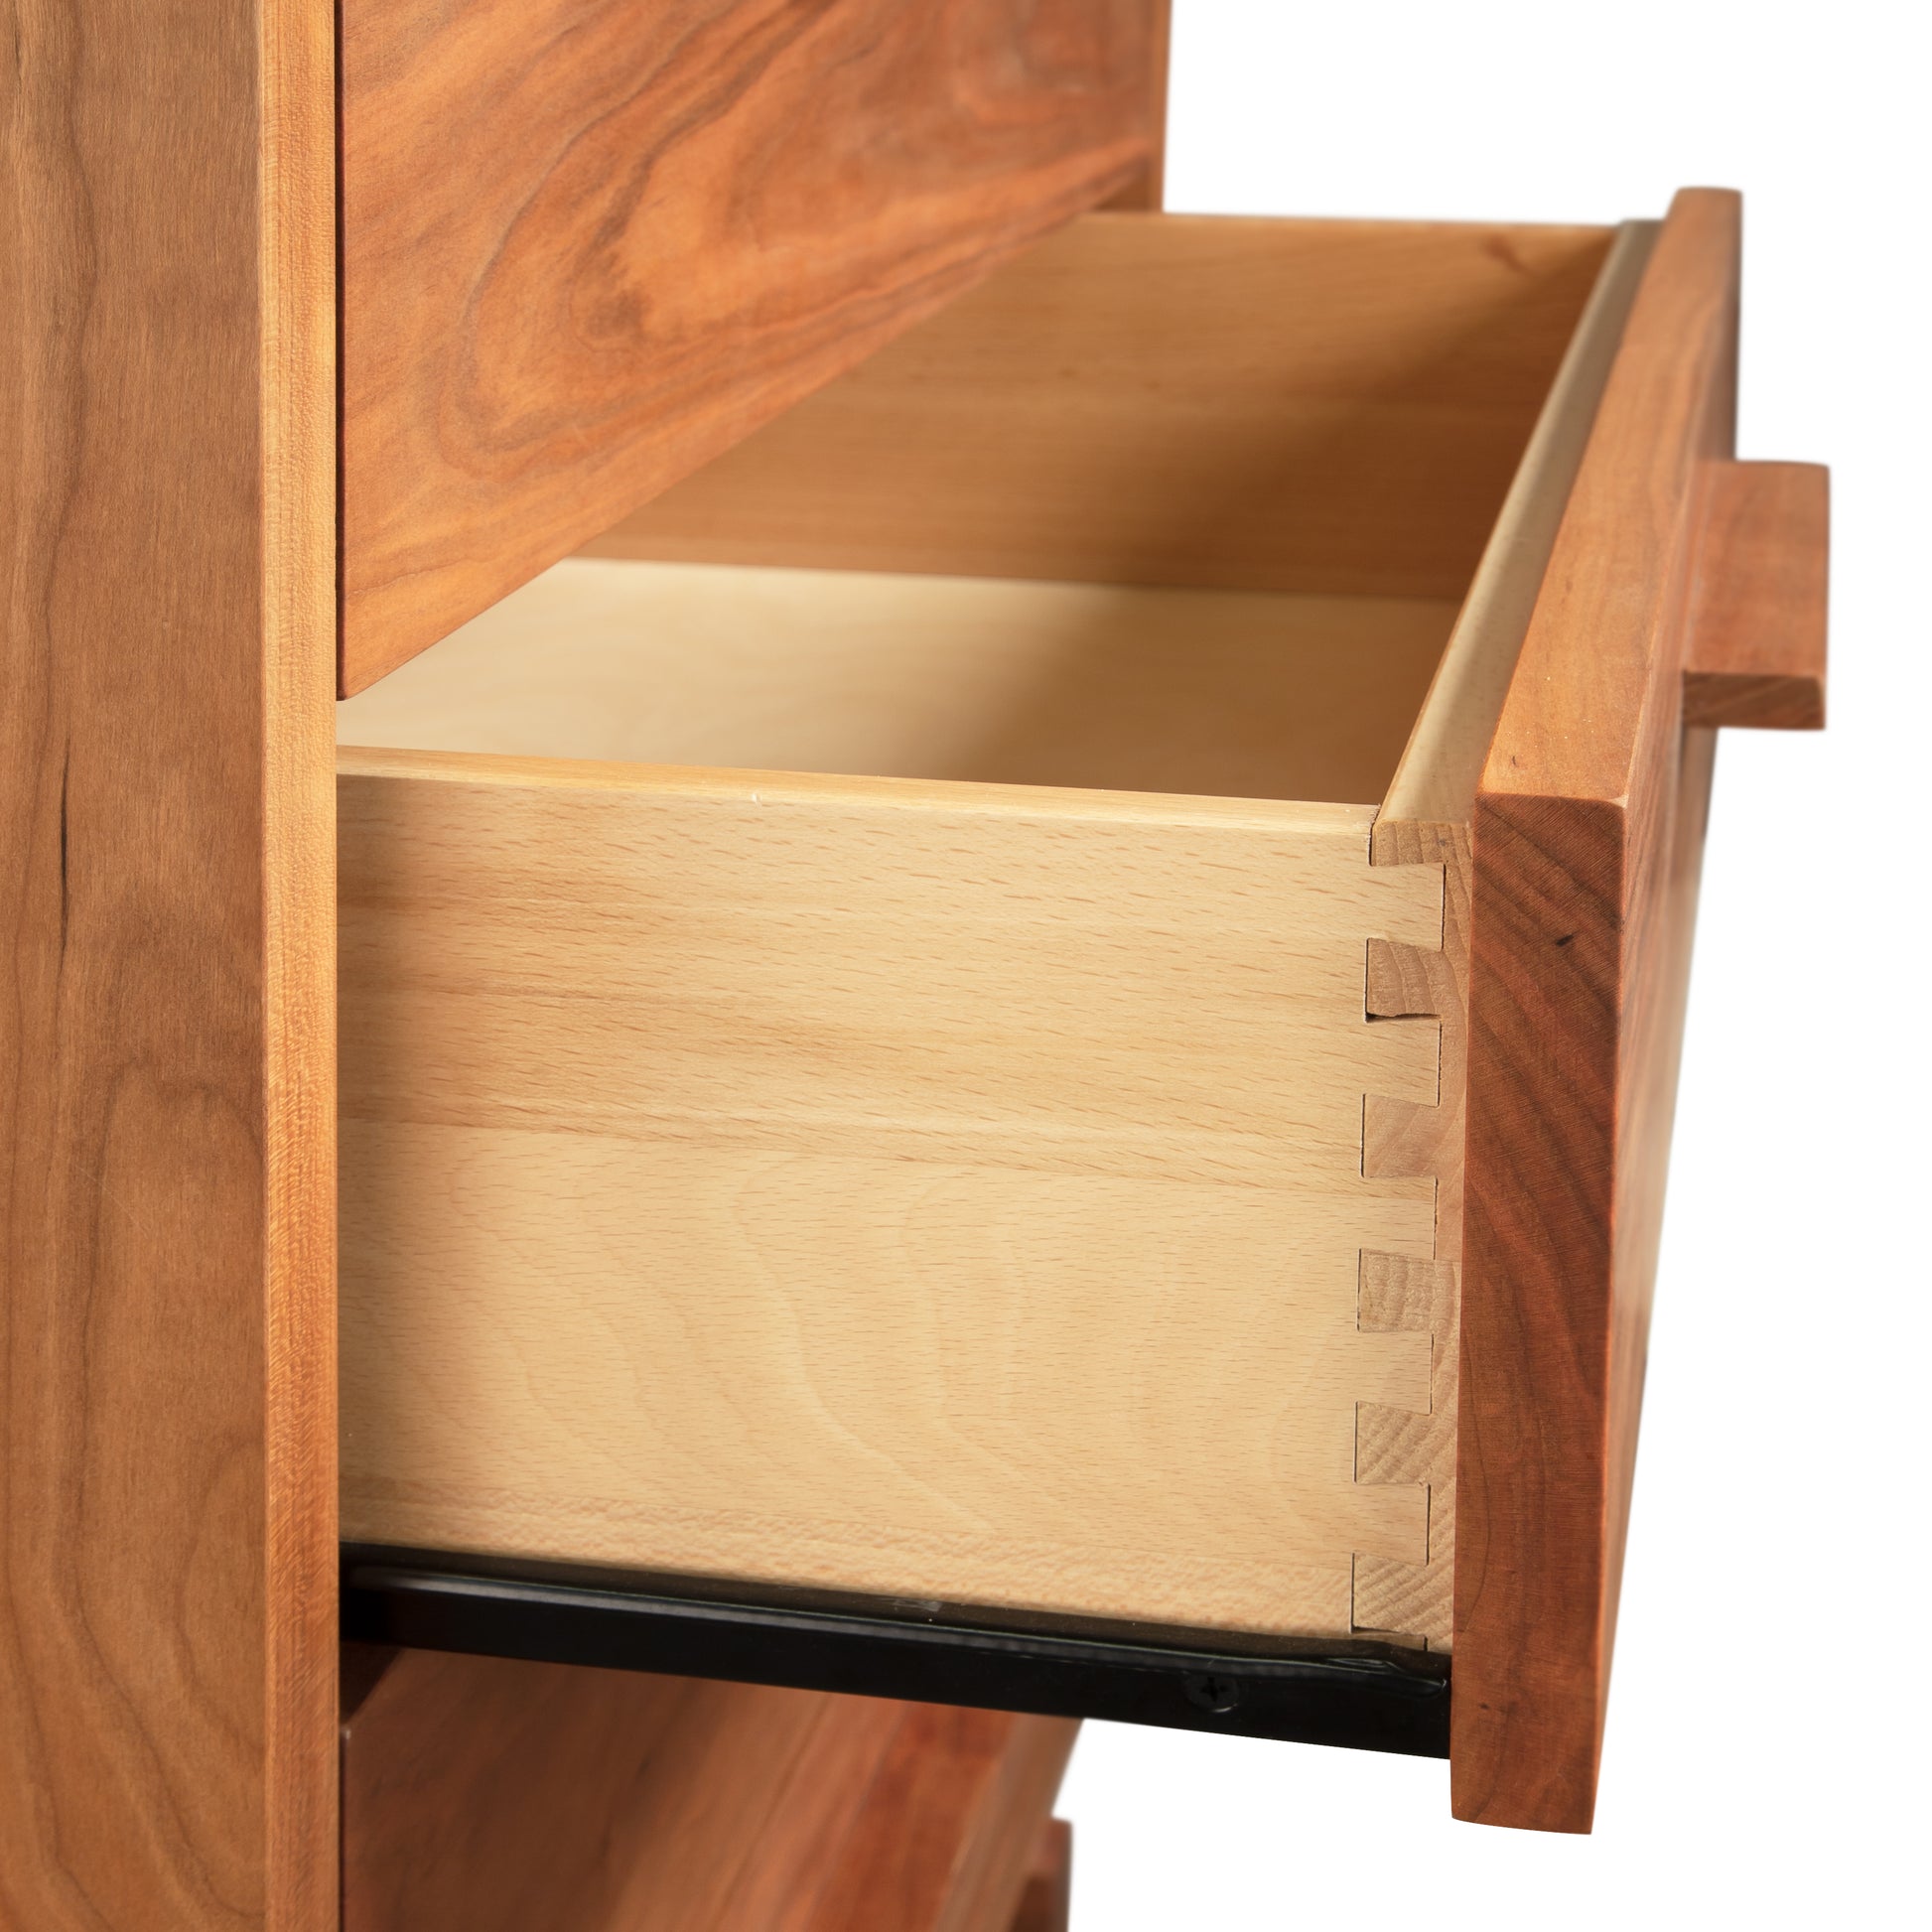 A Vermont Furniture Designs Loft 5-Drawer Chest's open wooden drawer, showcasing Vermont craftsmanship with dovetail joints at the corner, made from natural solid hardwood.